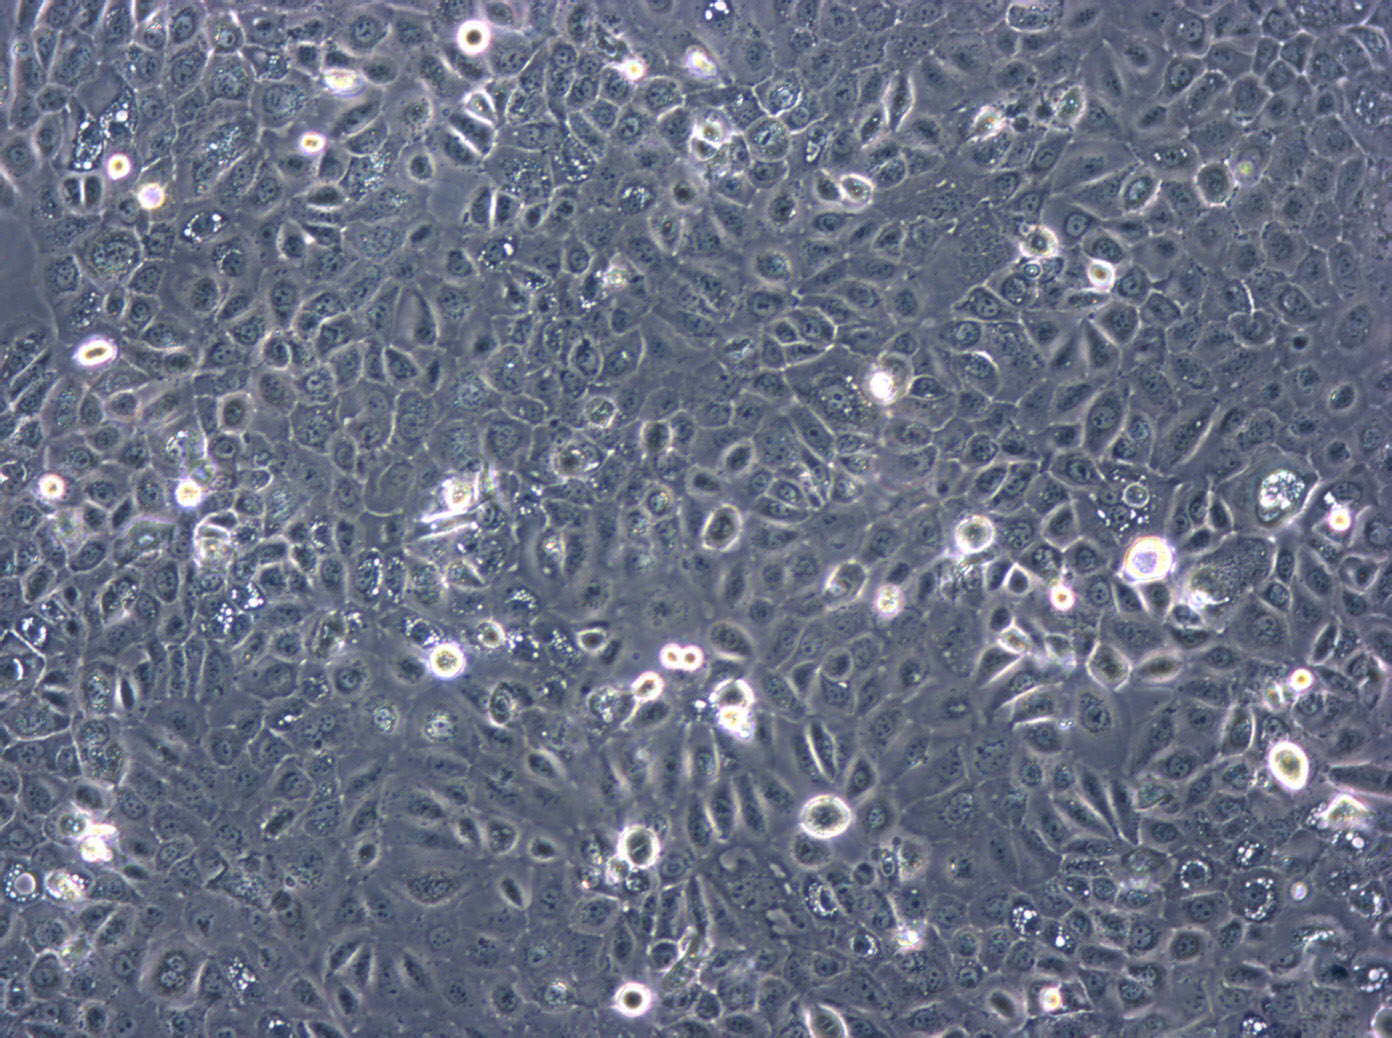 HCC1187 Epithelial Cell|人乳腺导管癌传代细胞(有STR鉴定),HCC1187 Epithelial Cell